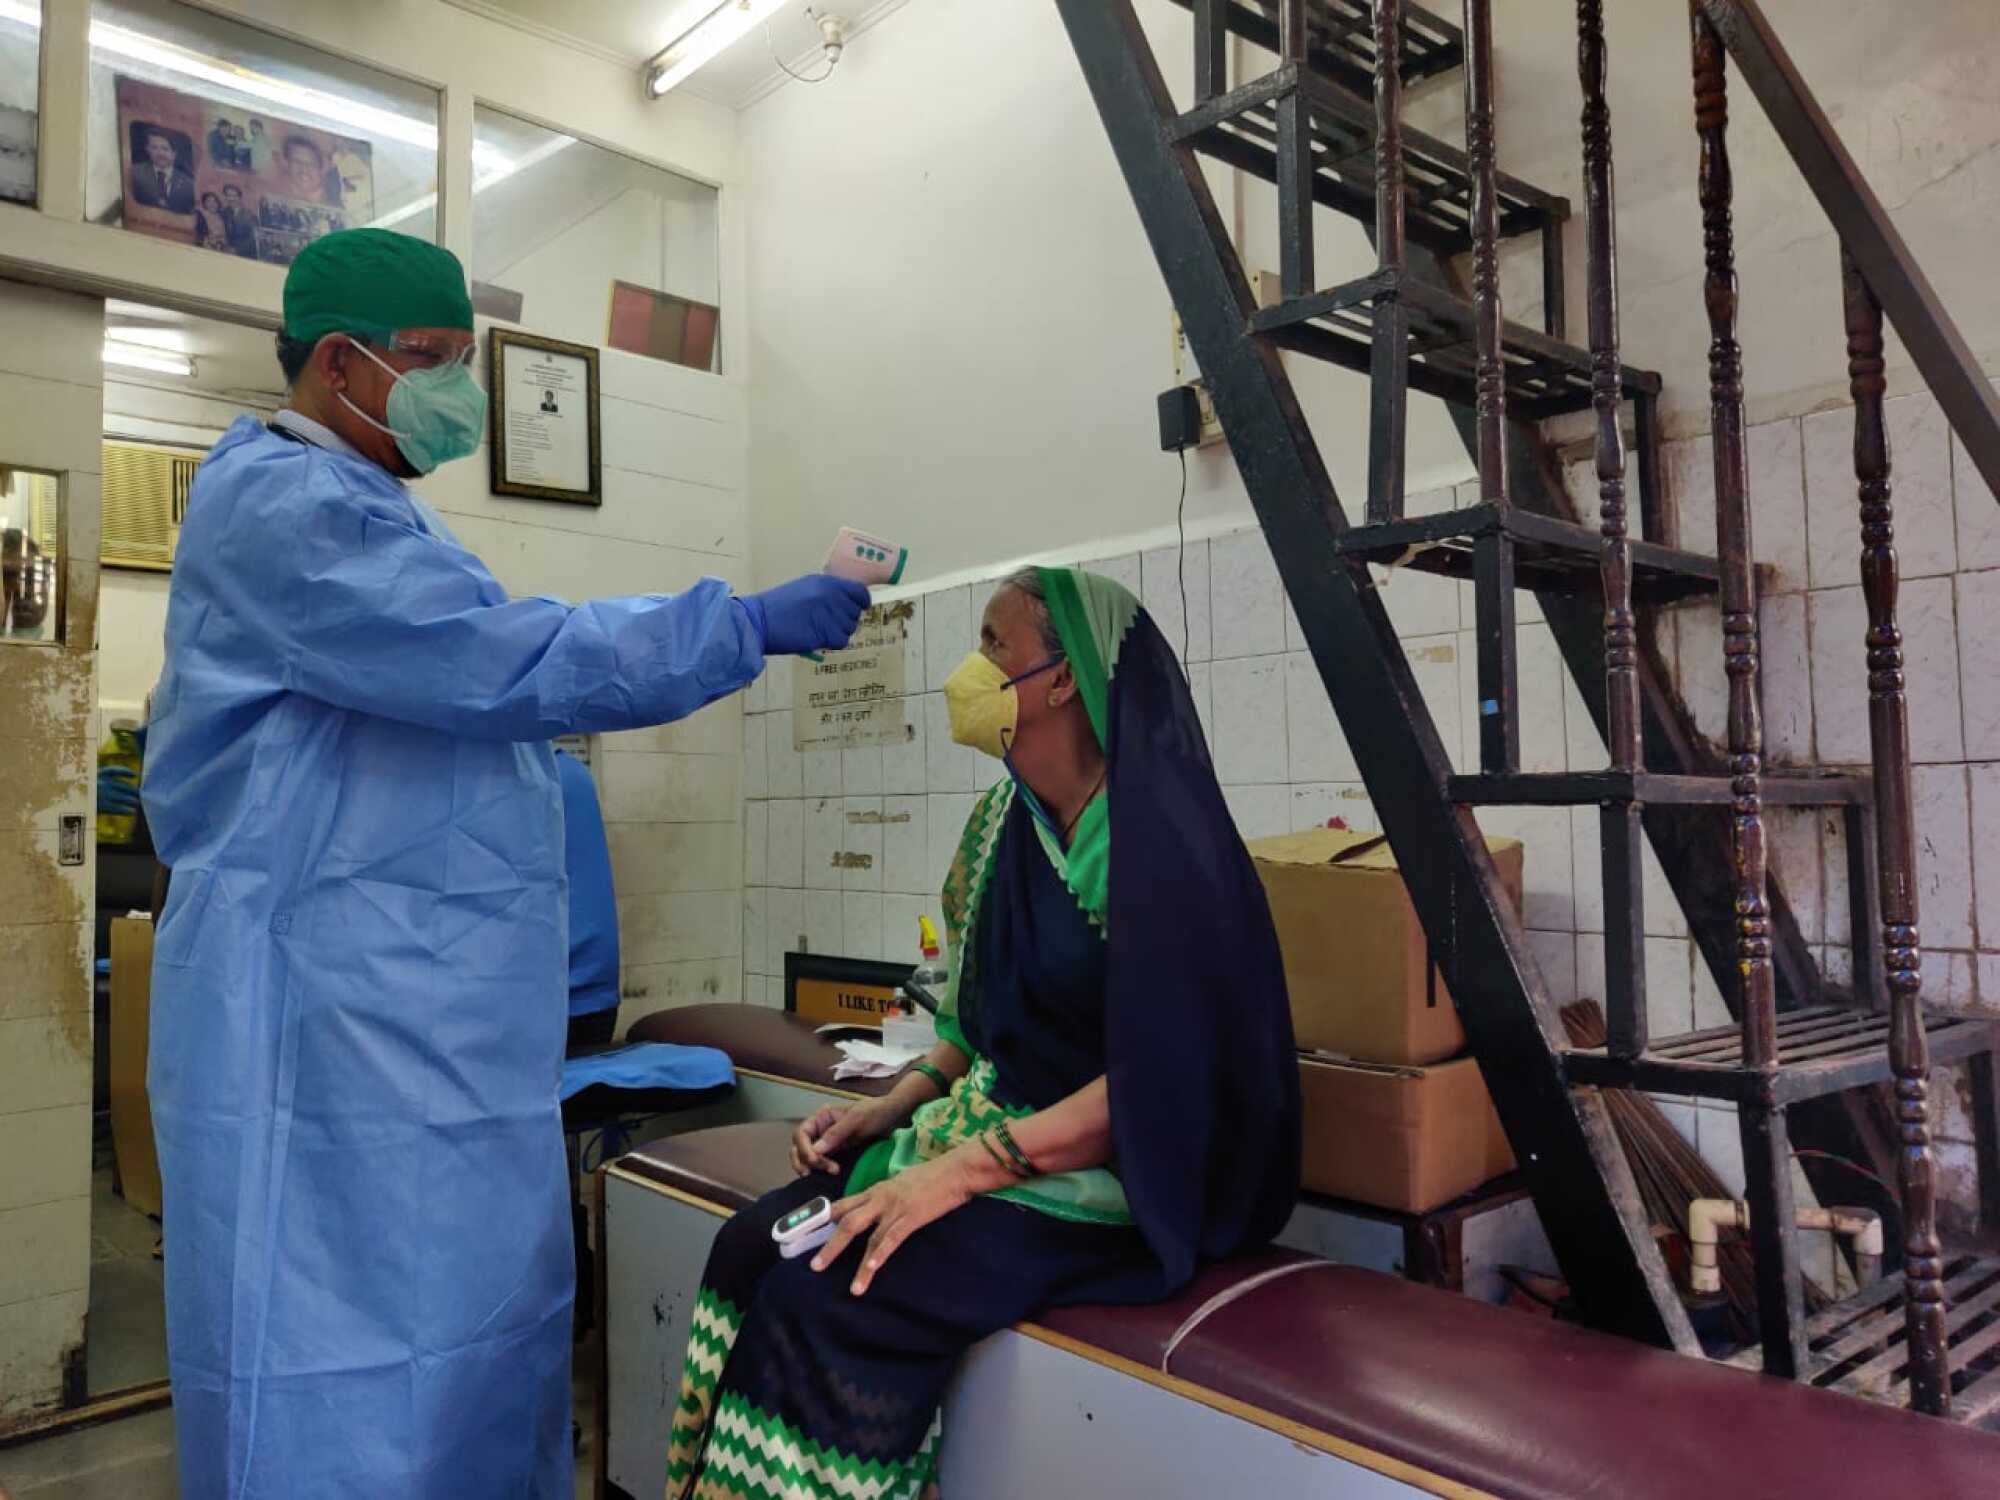 Physician Anil Pachanekar examines Lilavati, a patient, in his Dharavi clinic.